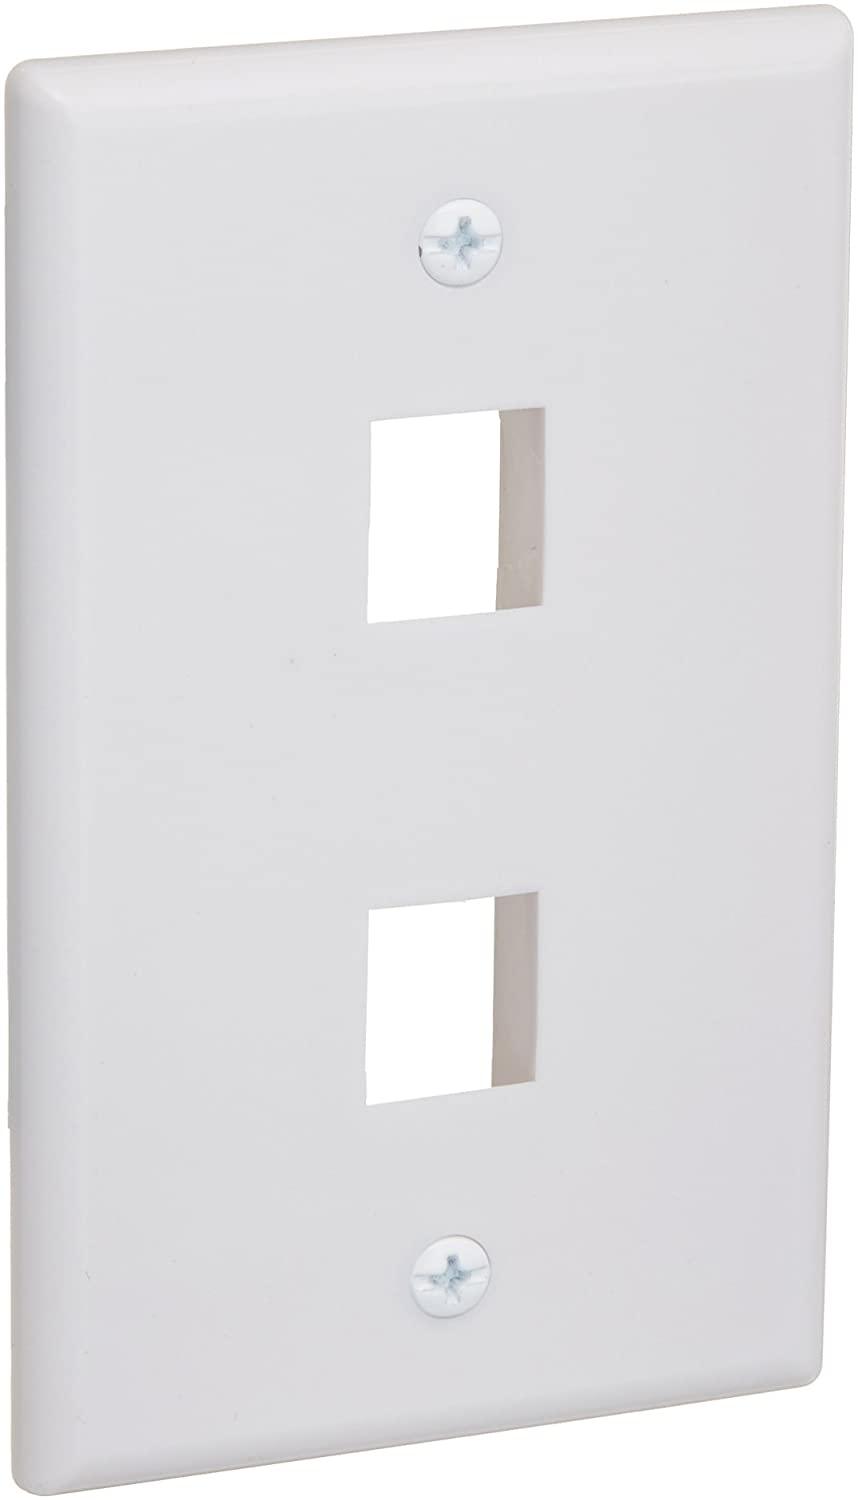 2 Port QuickPort outlet Wall Plate face plate, two Gang White